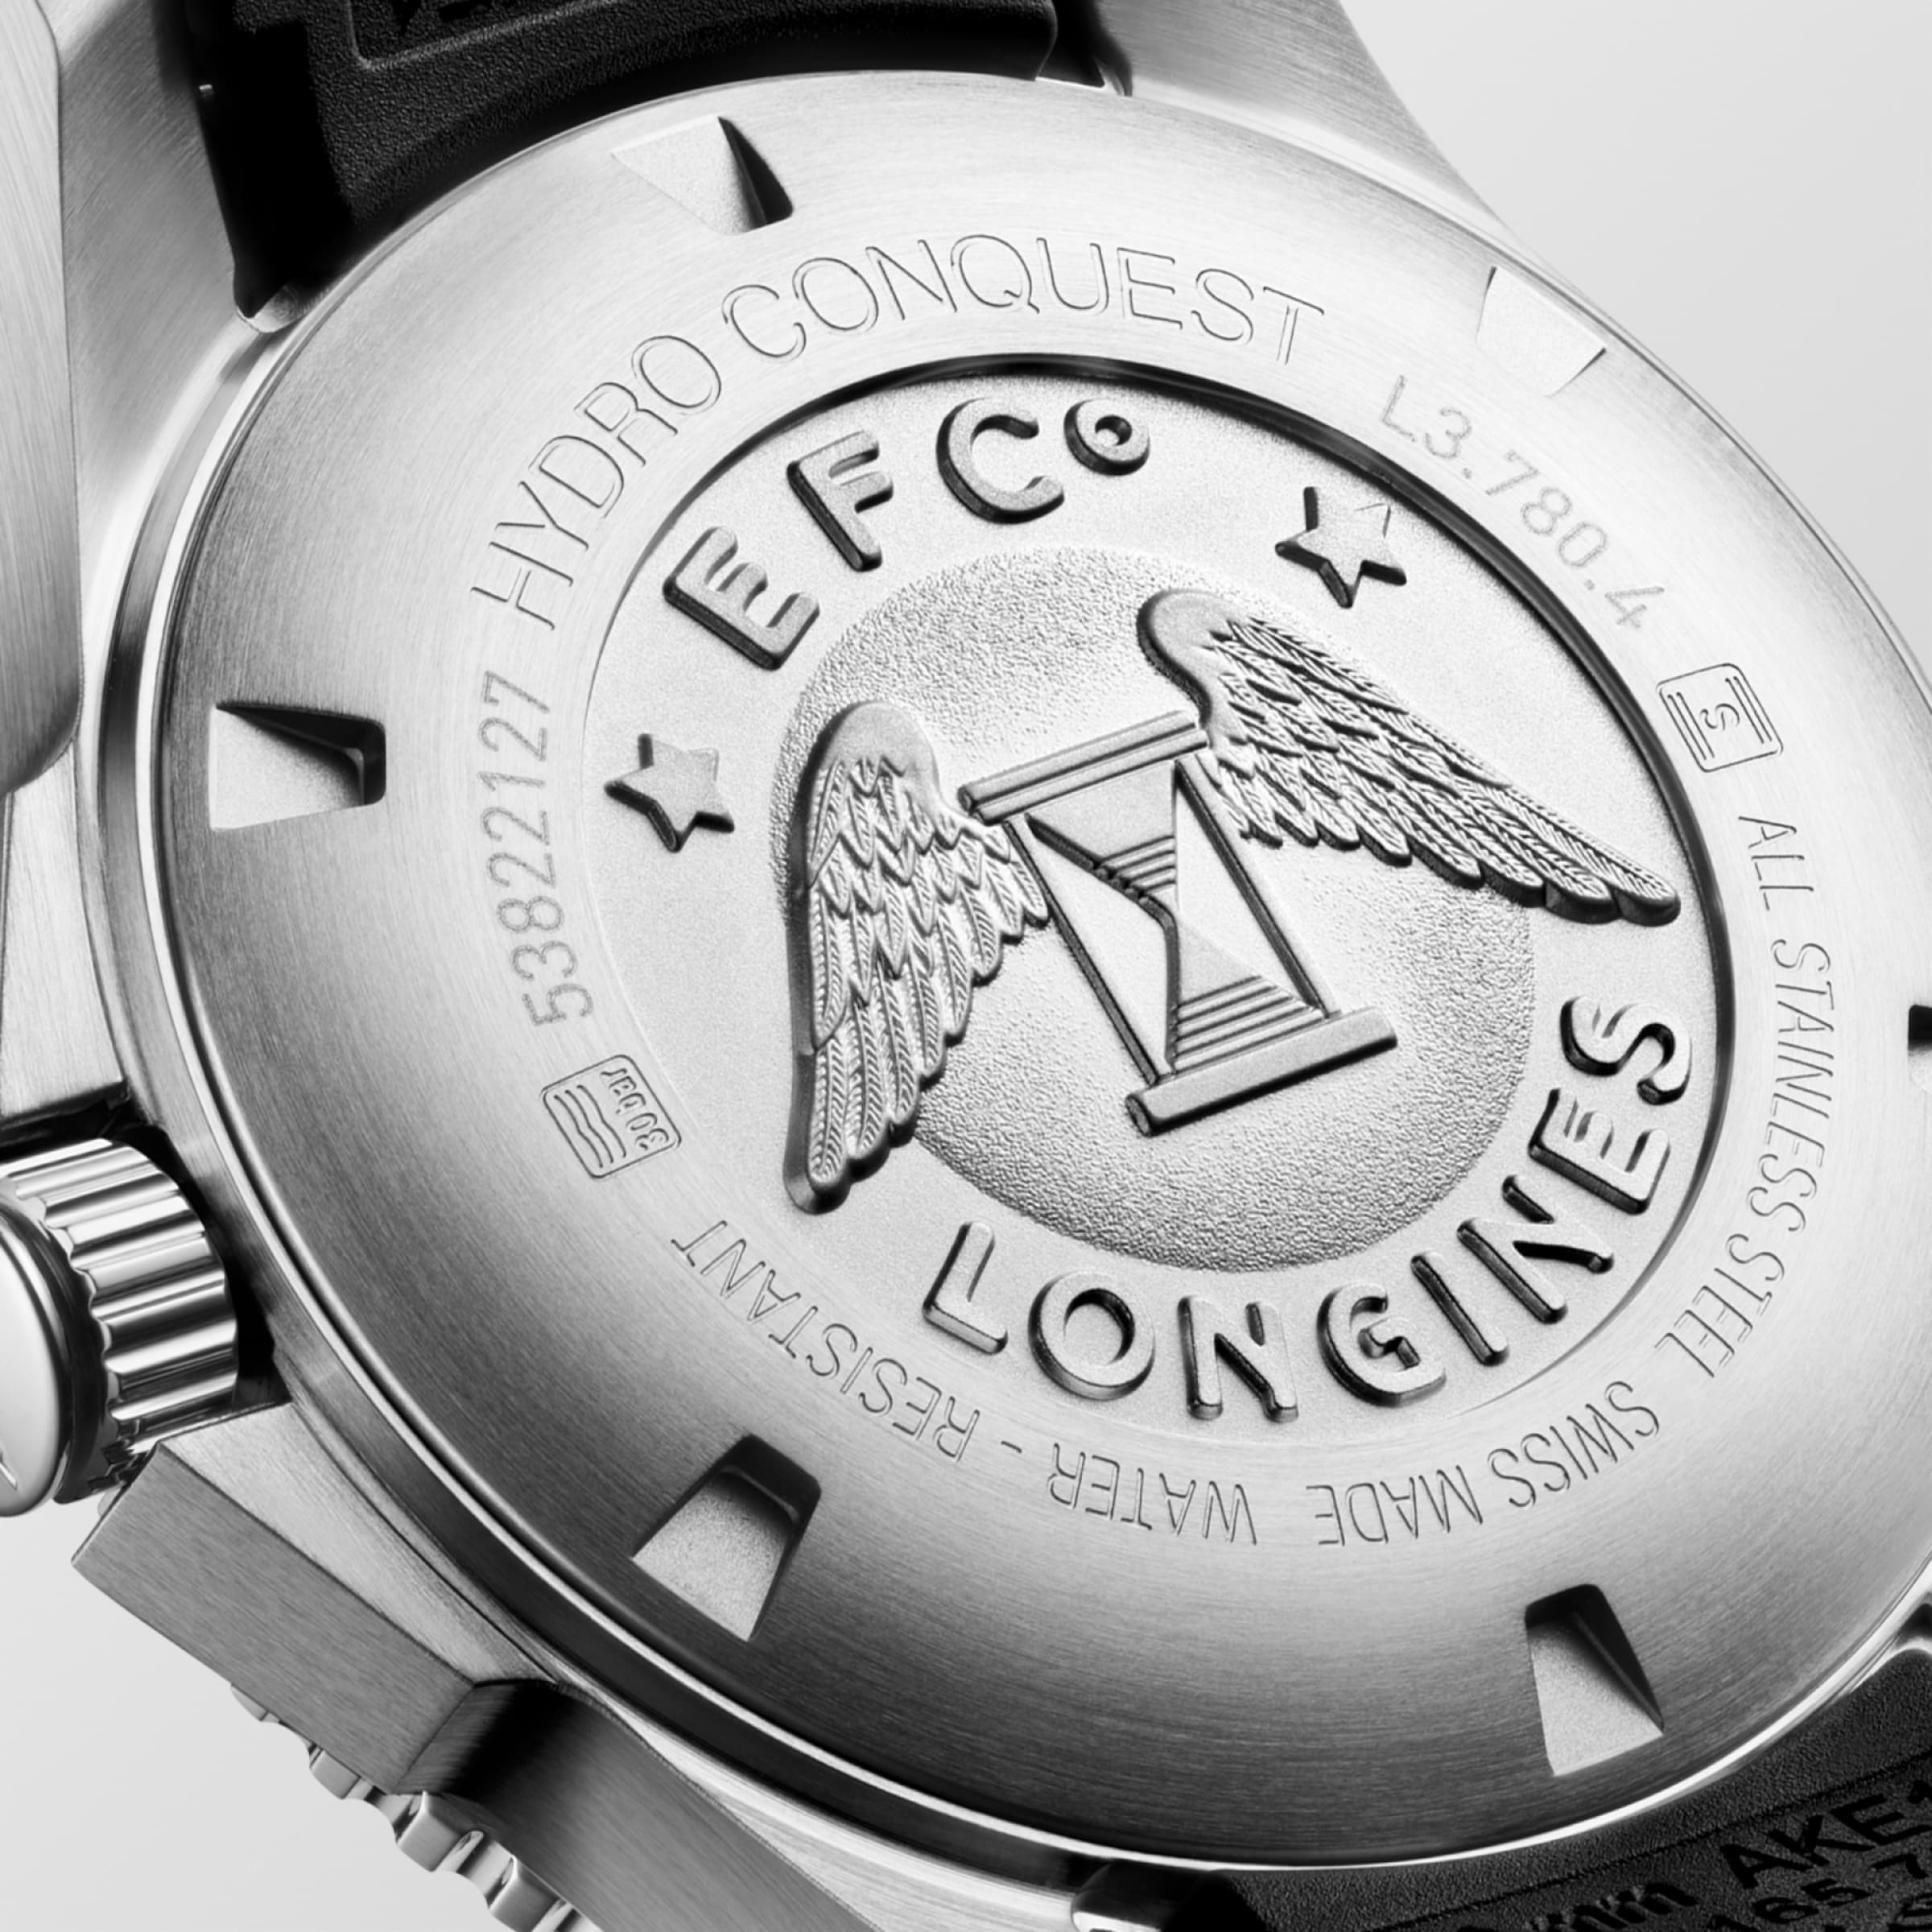 Longines HYDROCONQUEST Automatic Stainless steel and ceramic bezel Watch - L3.780.4.56.9